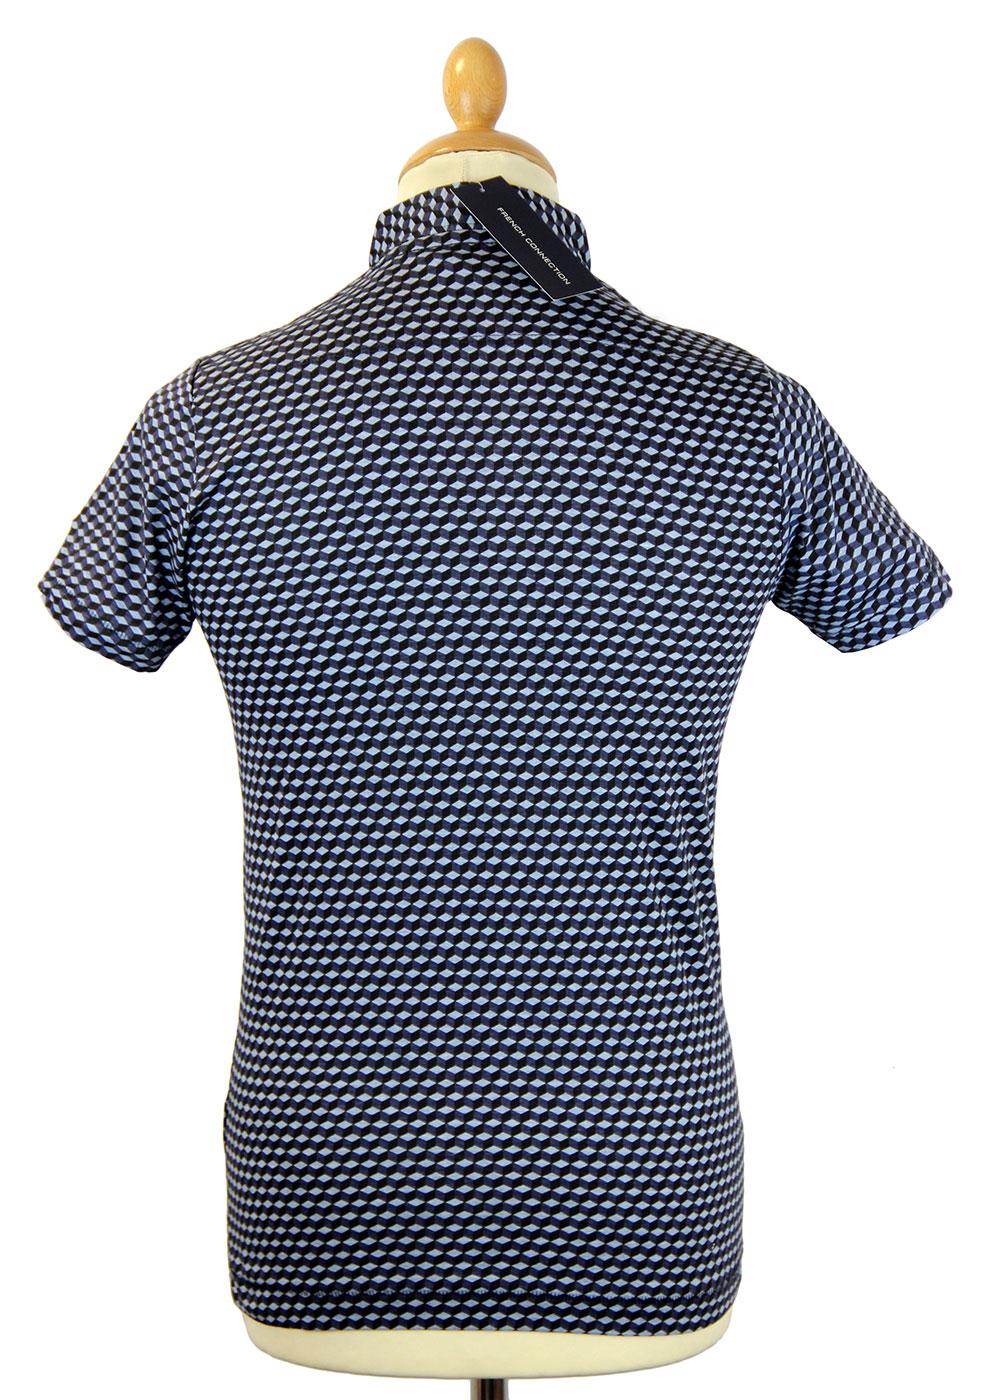 FRENCH CONNECTION Geometric Cube Print Retro Mod Polo Top